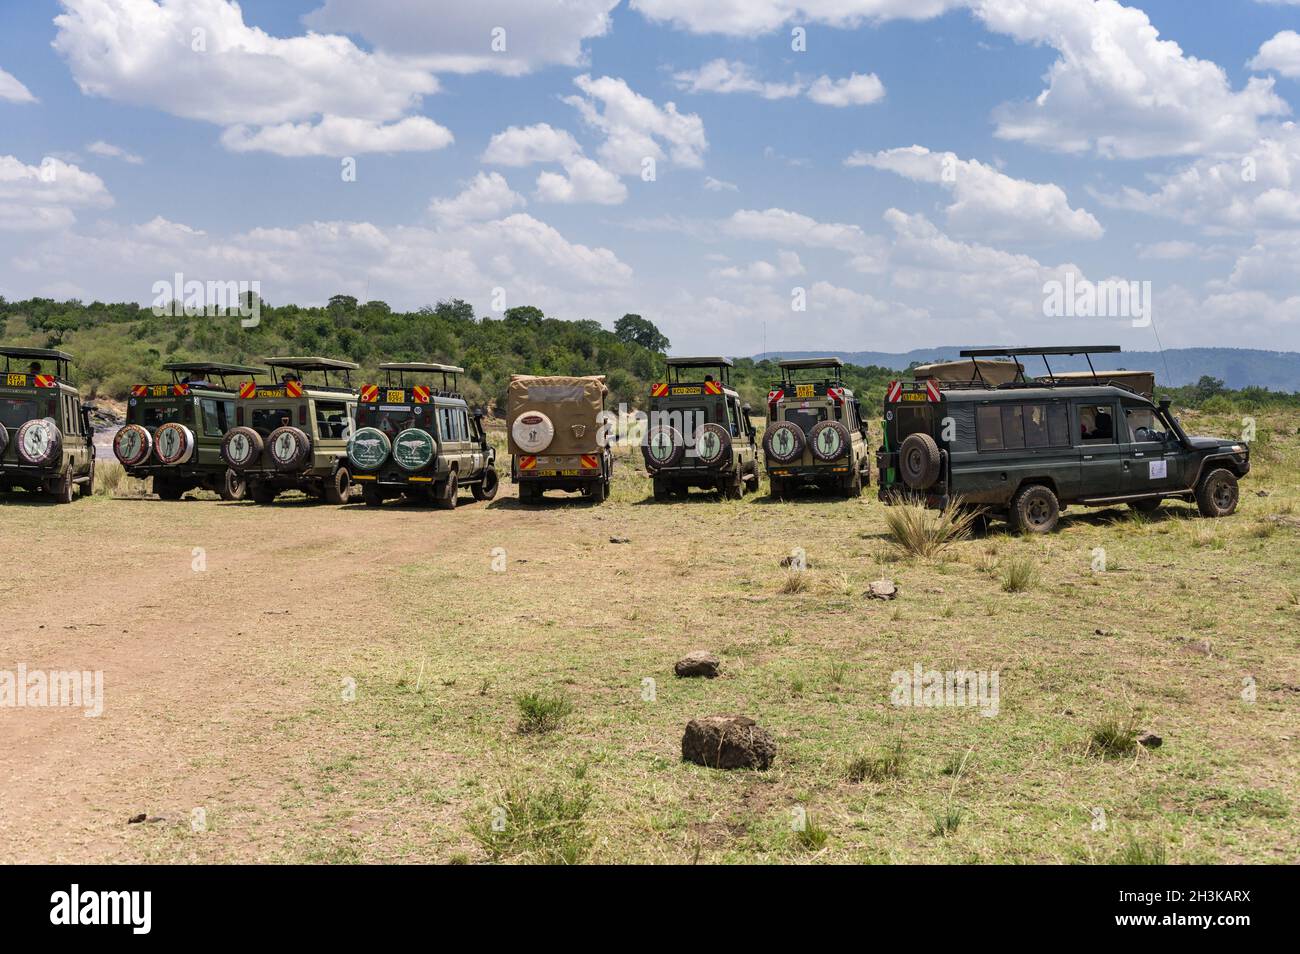 A row of 4x4 Toyota Landcruiser safari vehicles with tourists parked by the Mara river waiting for animals to cross, Masai Mara, Kenya Stock Photo